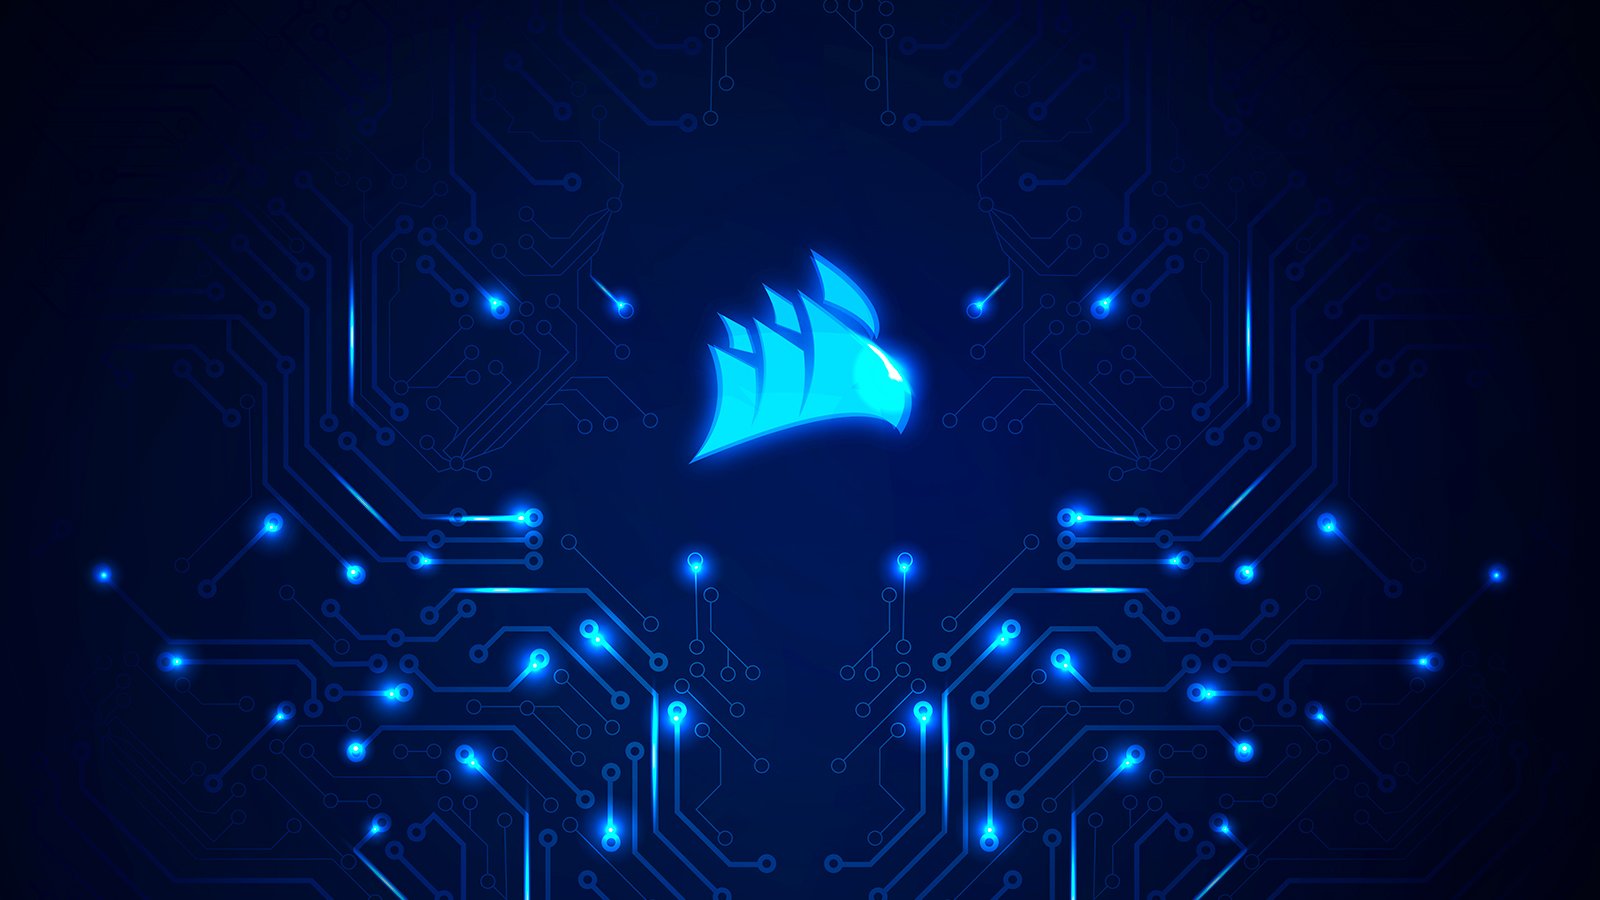 CORSAIR Twitterissä: Need a new desktop look? We have you covered for #WallpaperWednesday out this 'Trace Blue' design